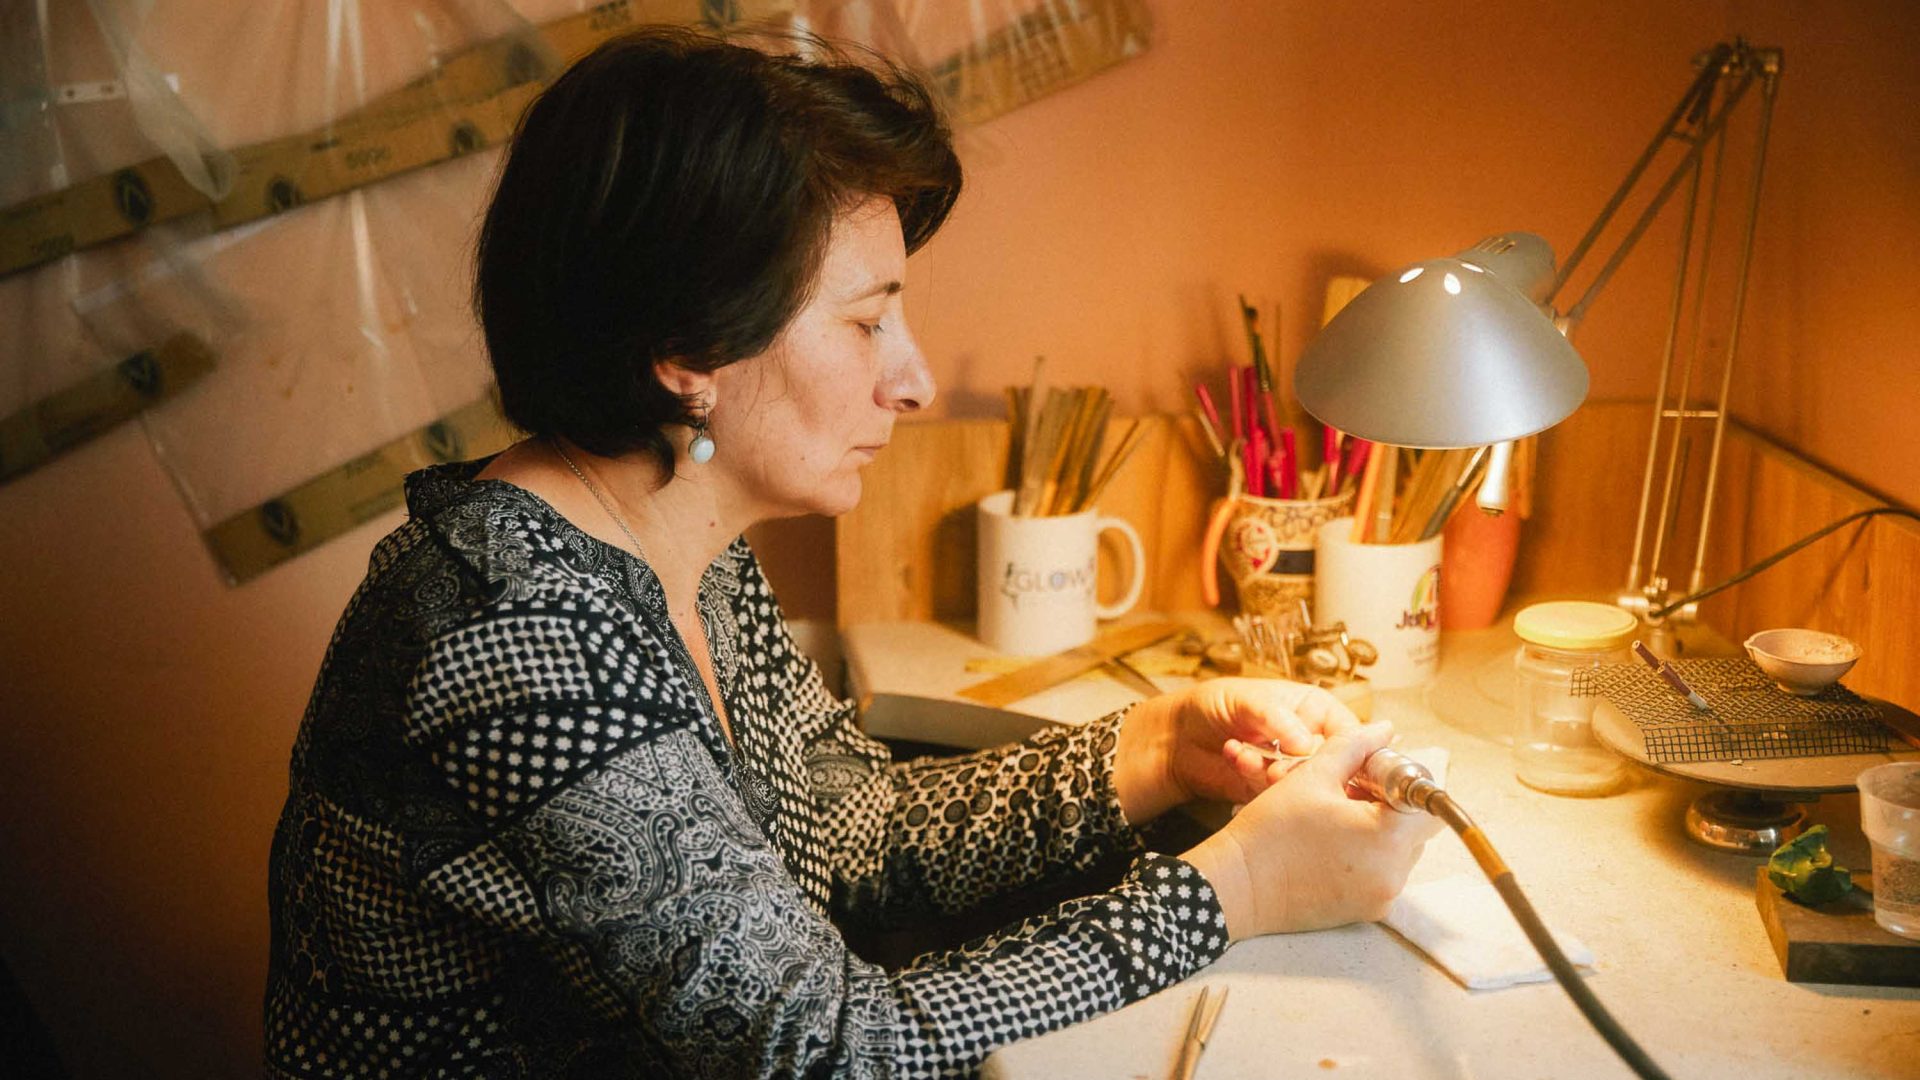 A woman works at a desk making jewellery.